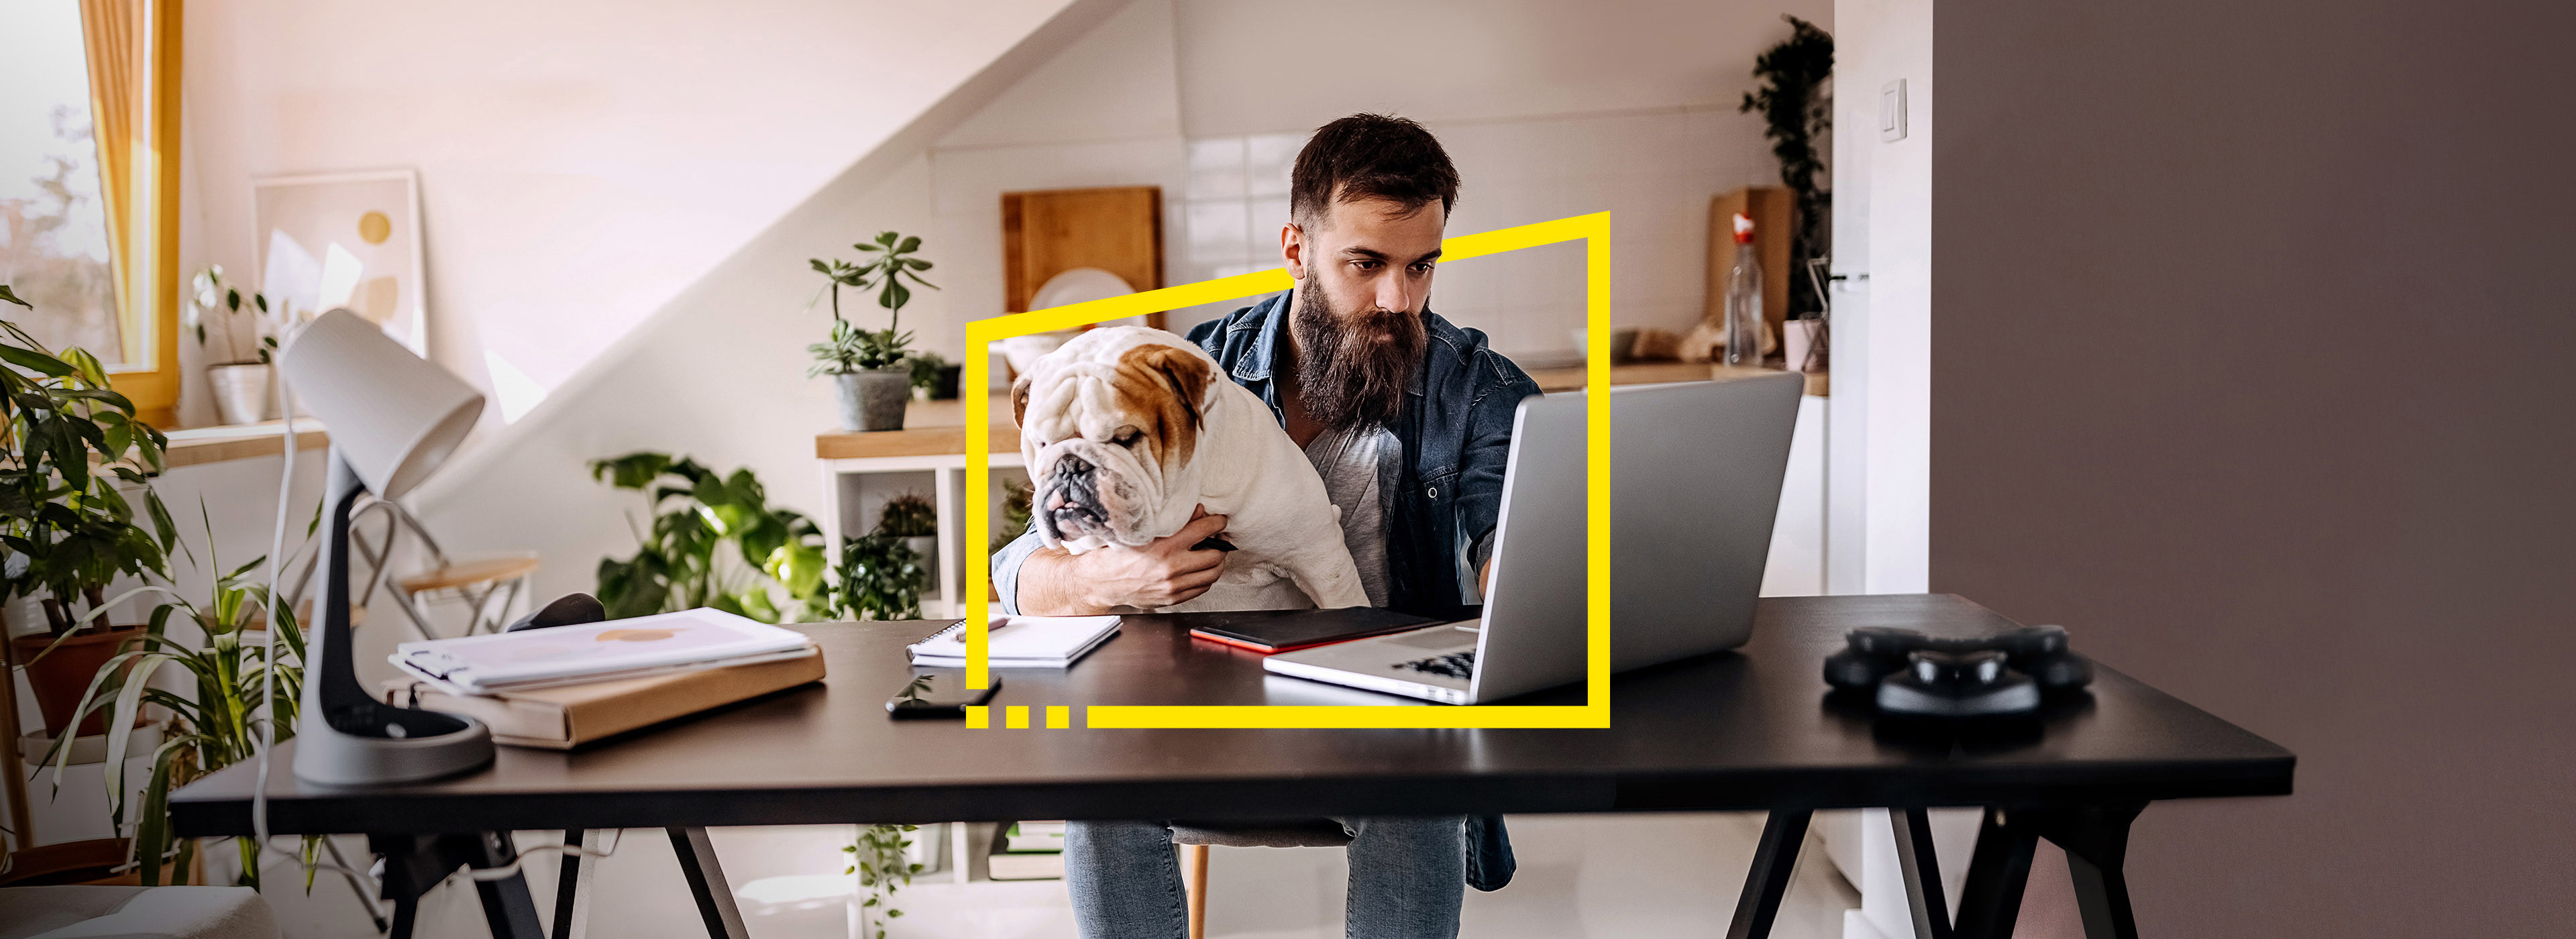 EY - Are consumers comfortable in the digital home?